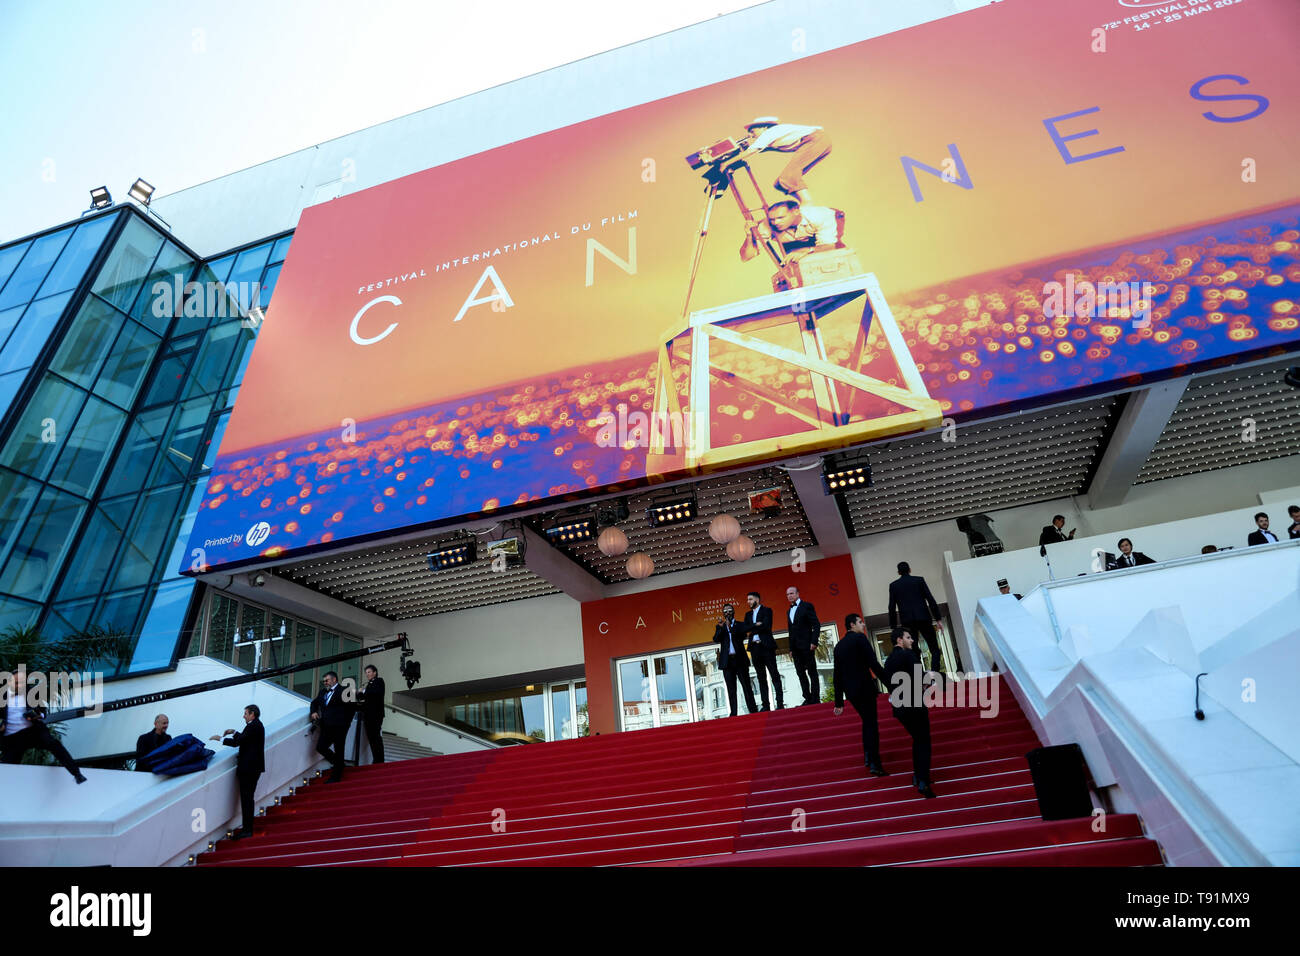 Cannes. 15th May, 2019. The Stairs during the premiere of " LES MISÉRABLES  " during the 2019 Cannes Film Festival on May 15, 2019 at Palais des  Festivals in Cannes, France. (